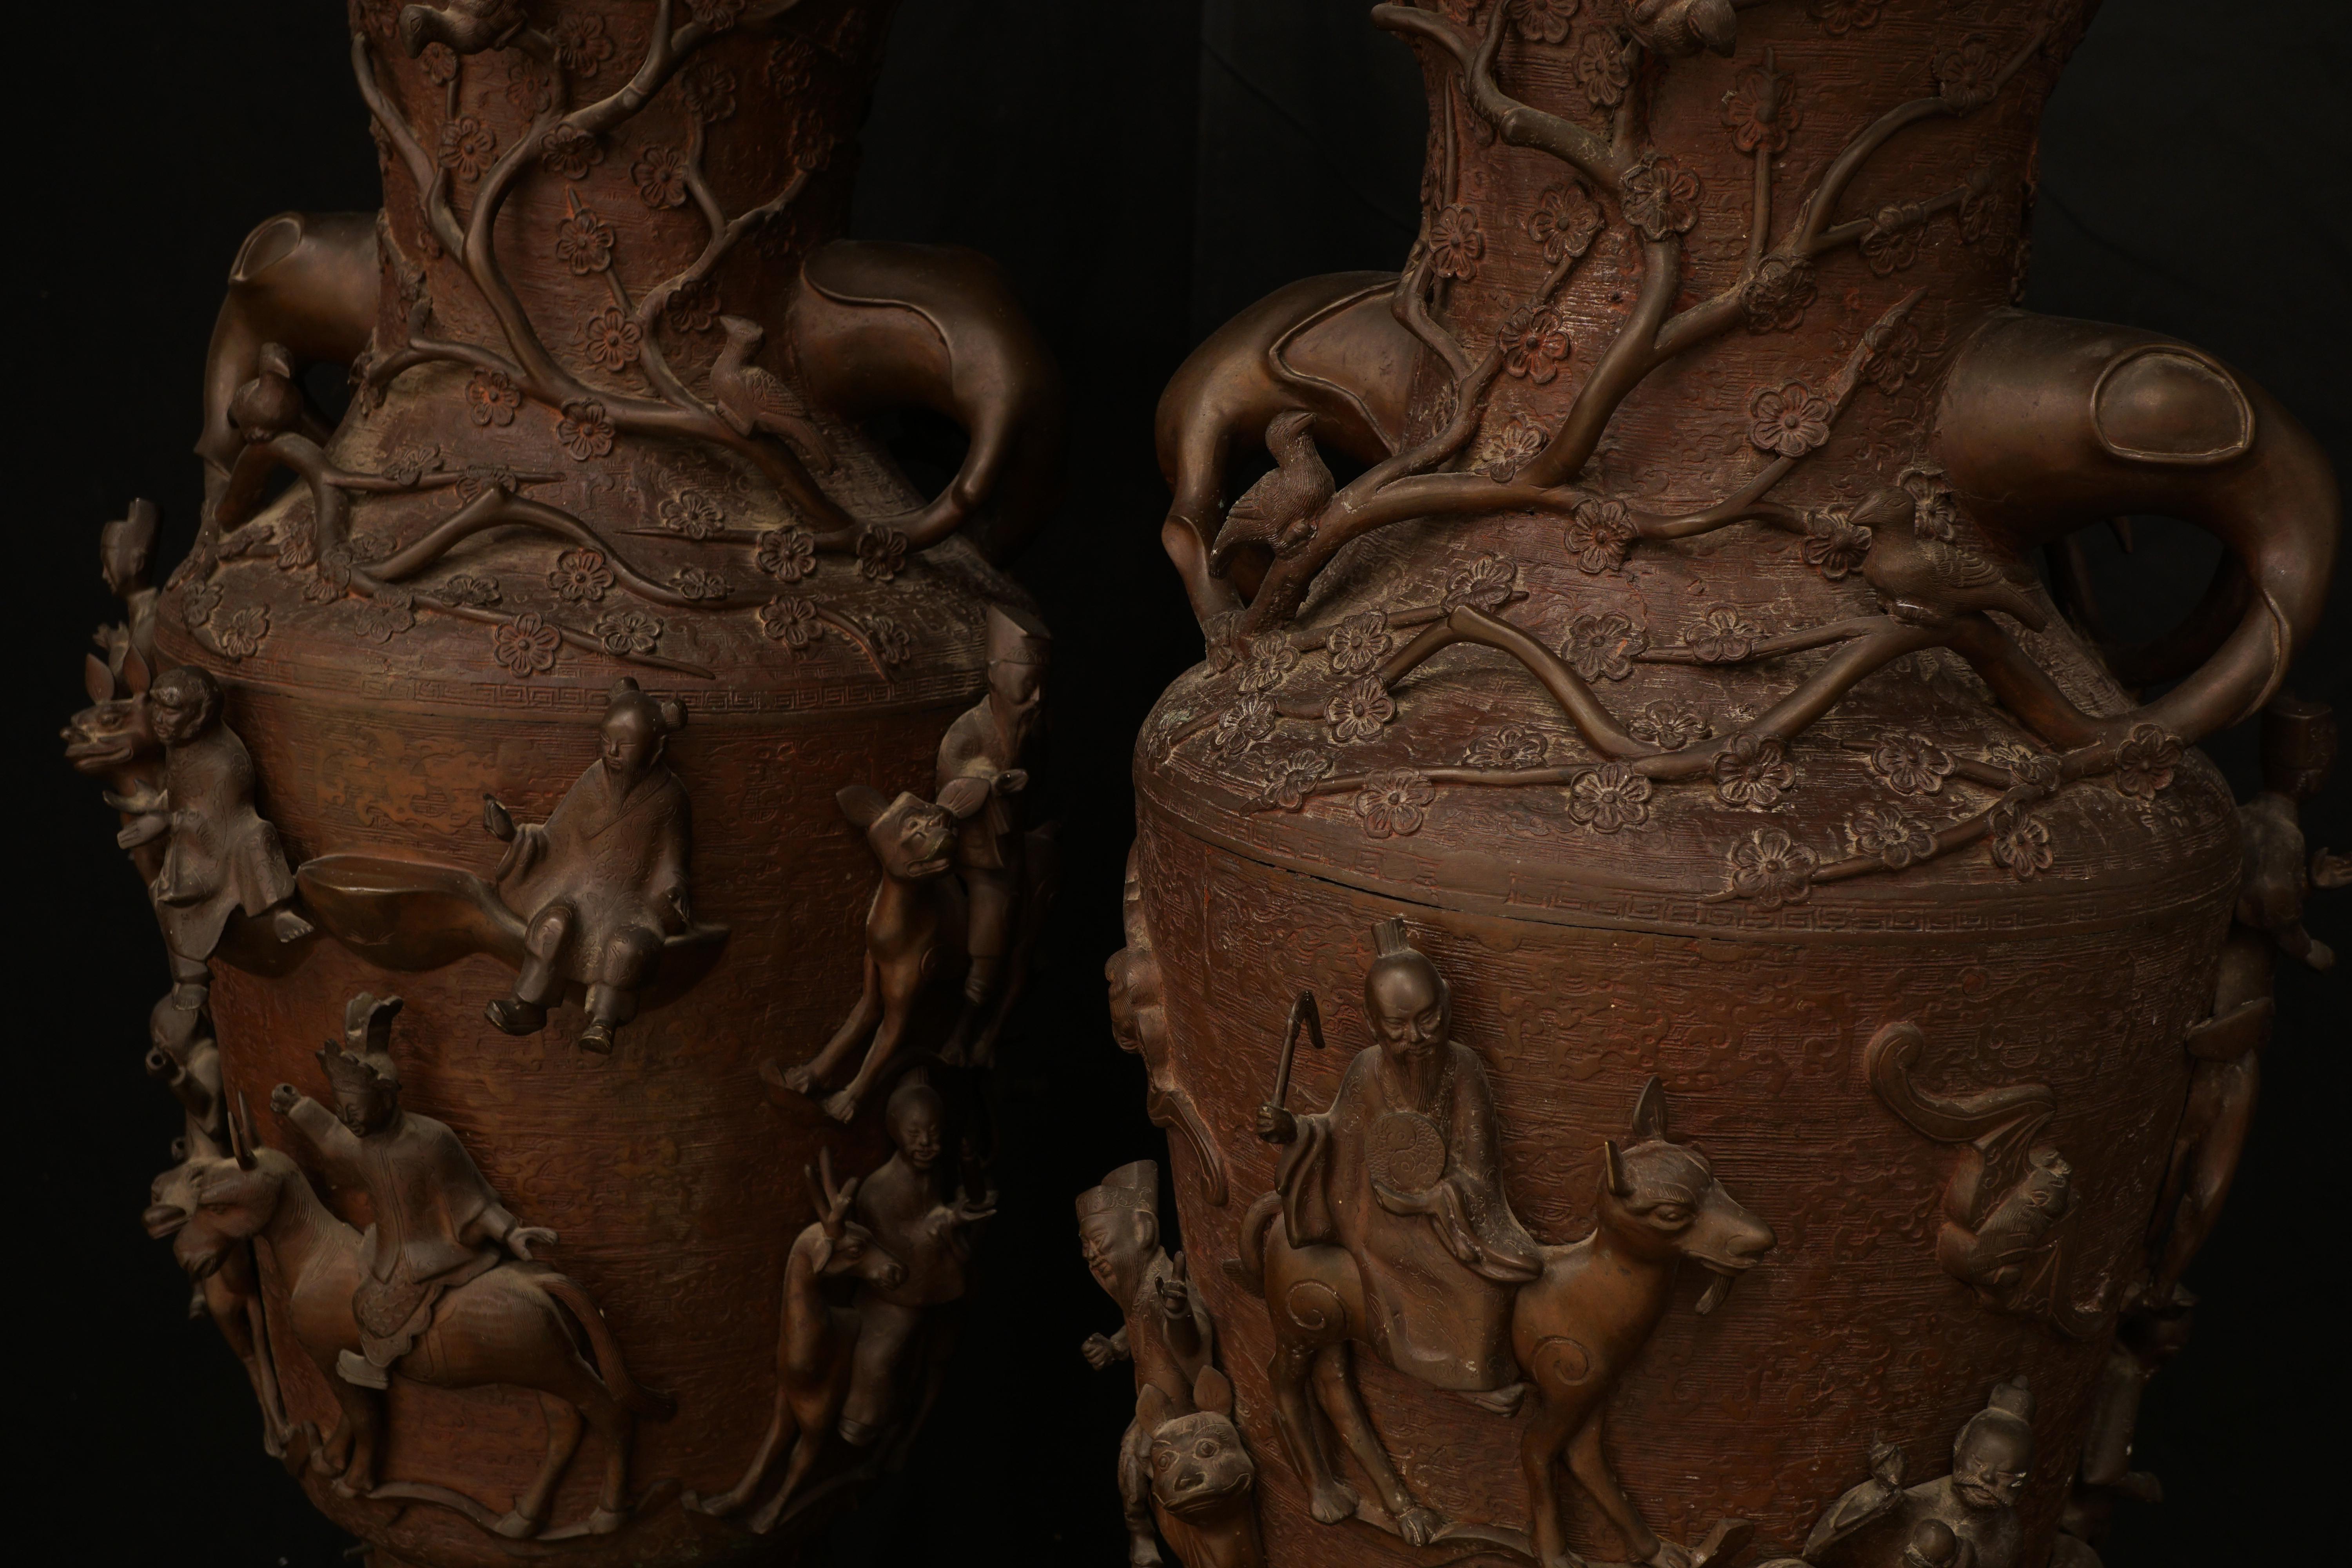 Pair of large Chinese late 19th century bronze vases from the Danish castle Sophienberg at Copenhagen. Depicted in the book 